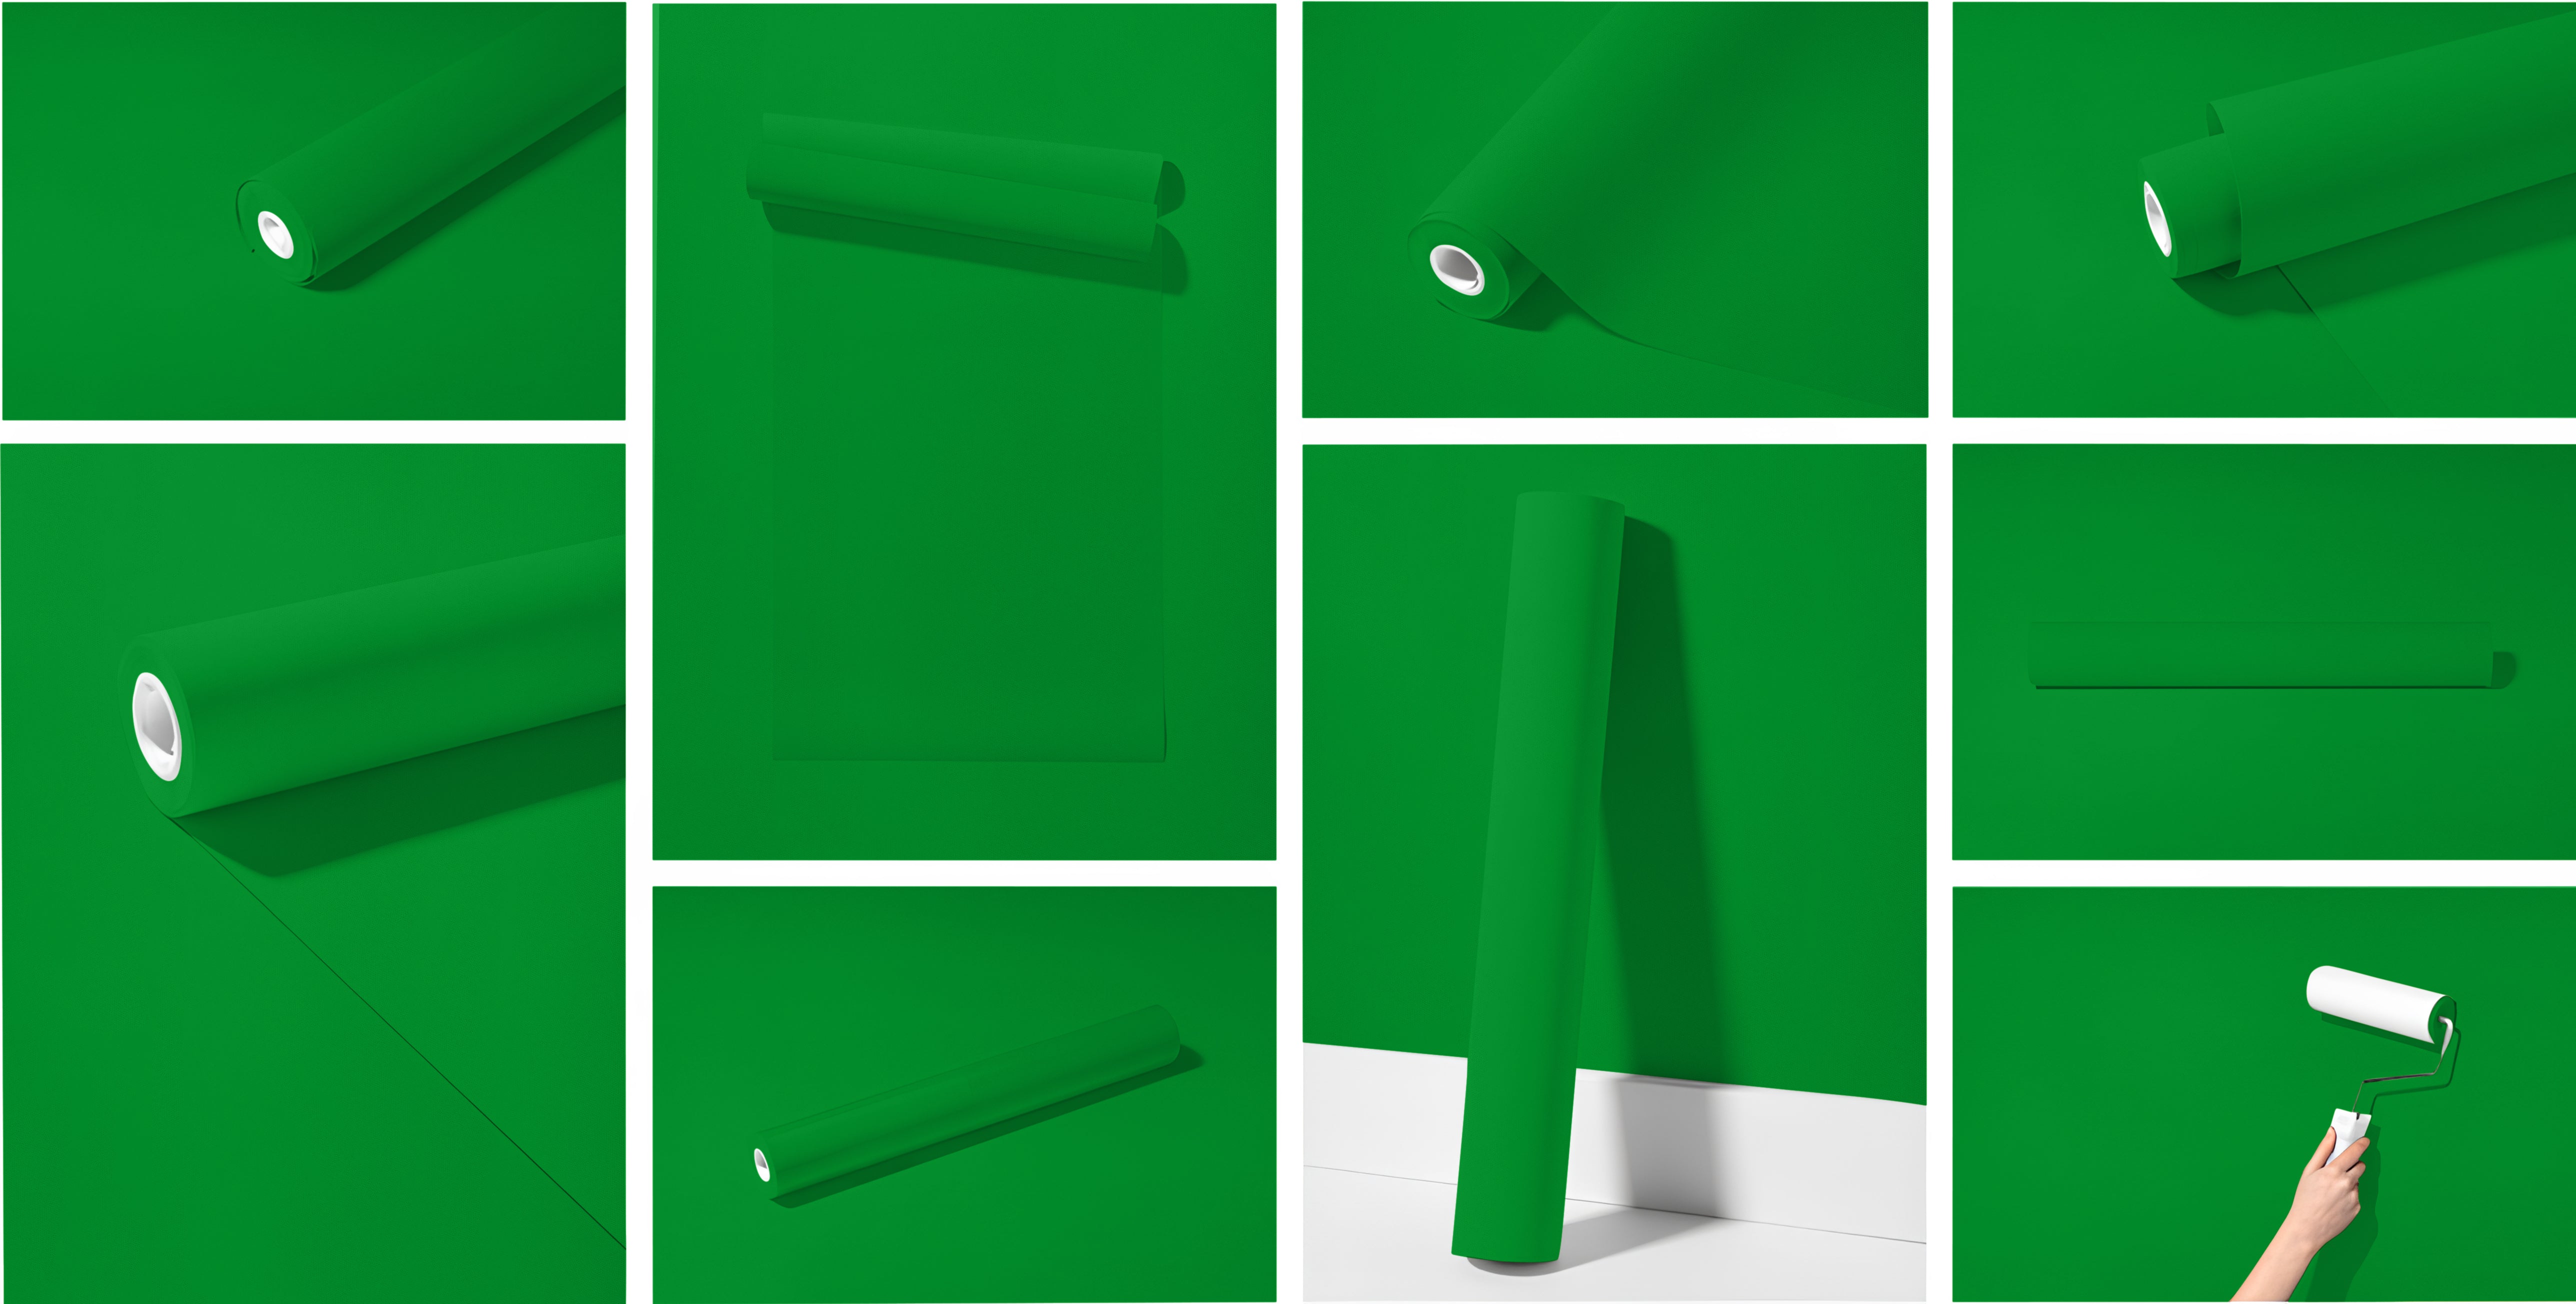 Peel & Stick Removable Re-usable Paint - Color RAL 6037 Pure Green - offRAL™ - RALRAW LLC, USA